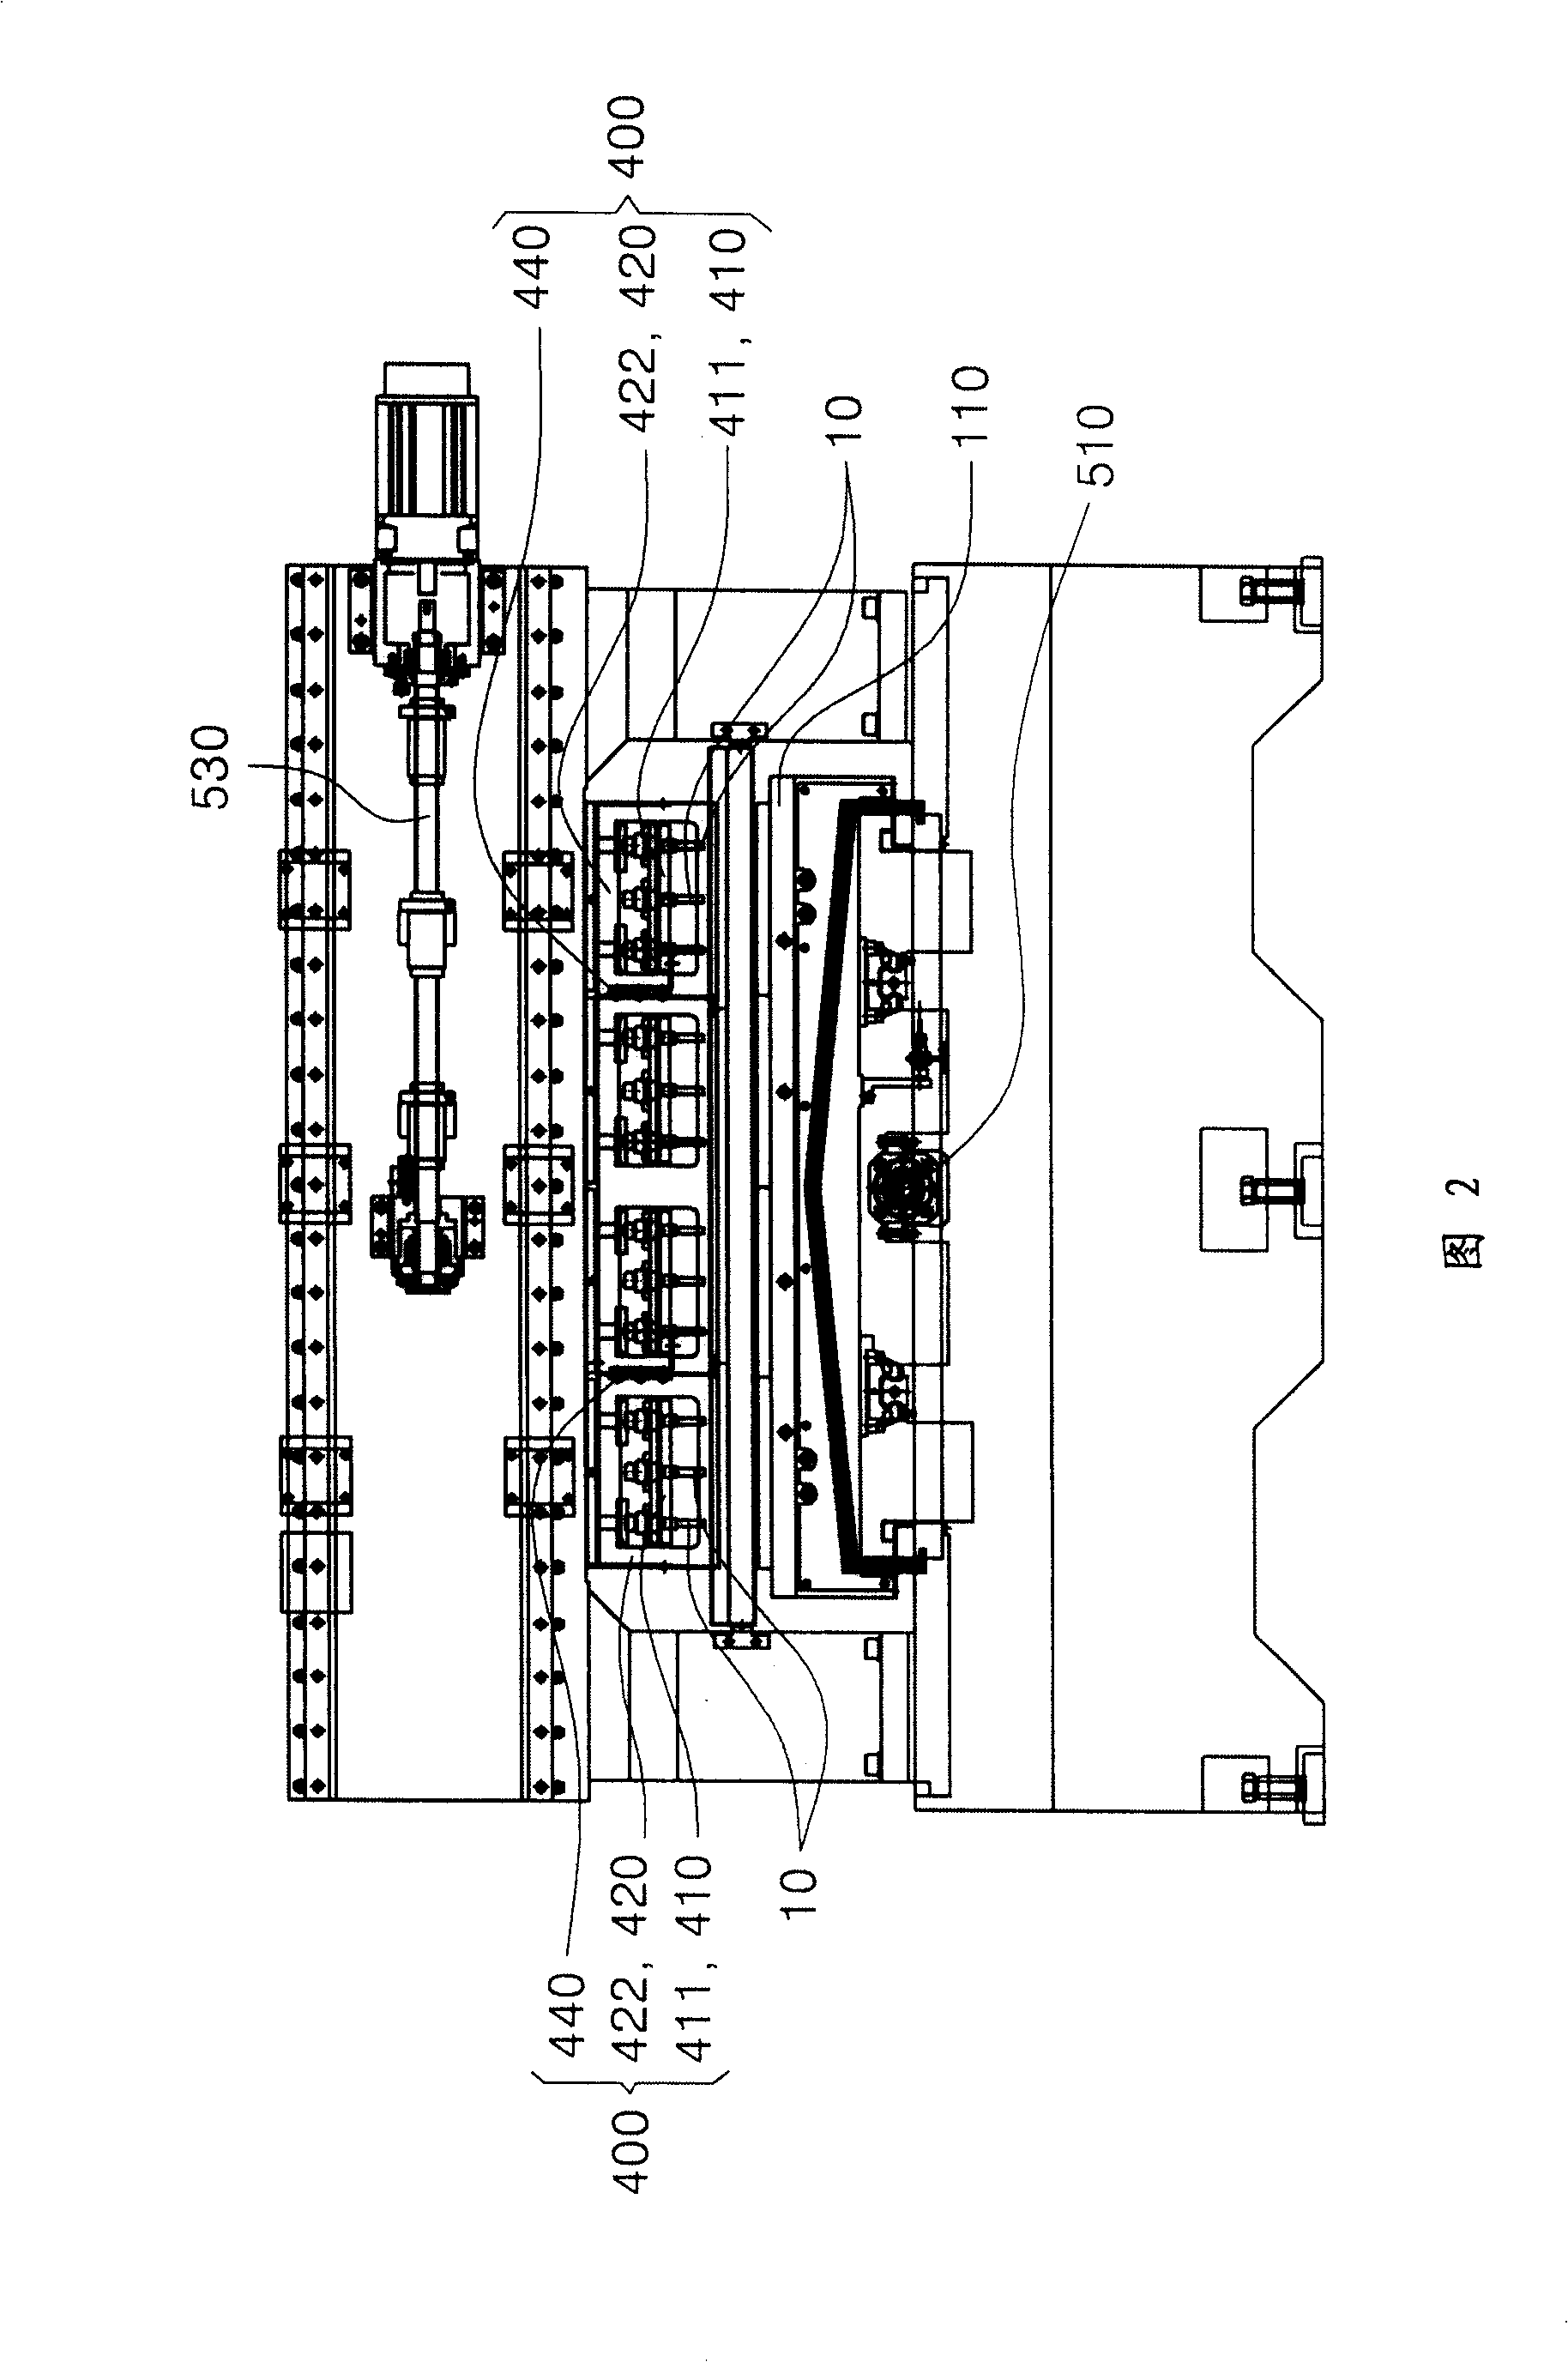 Glass processing apparatus and method